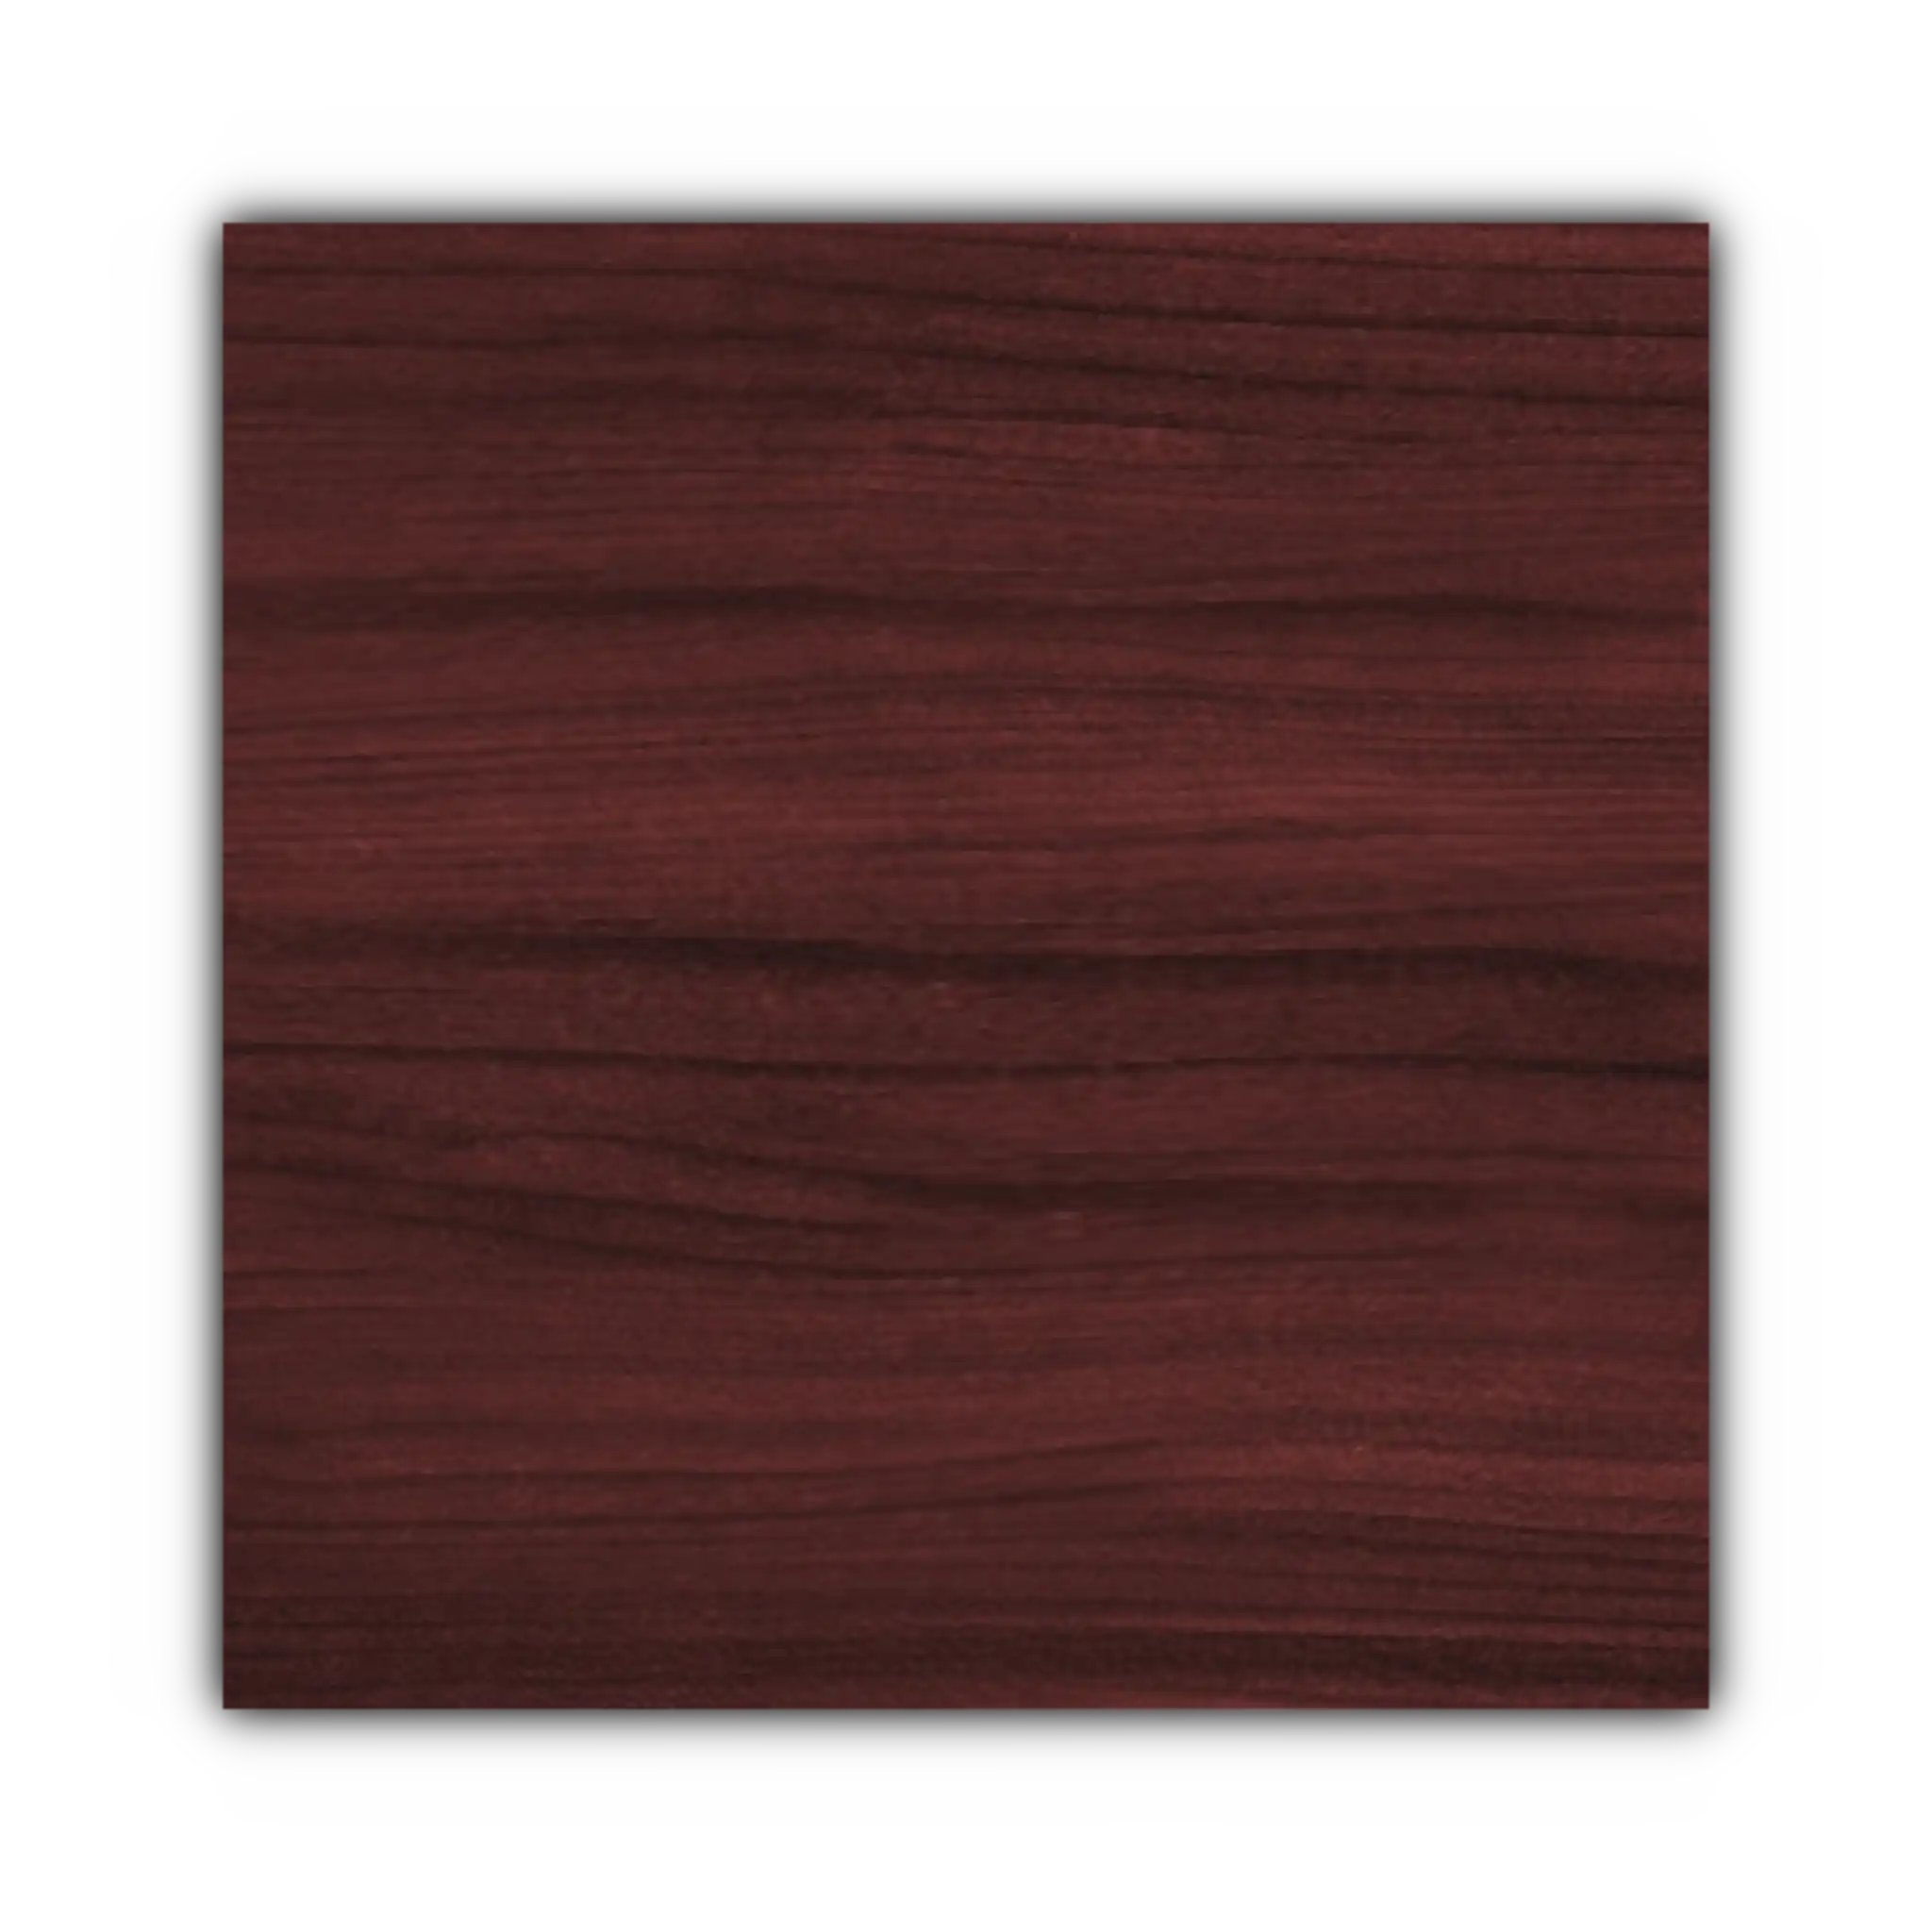 A tile that shows the structure of mahogany wood